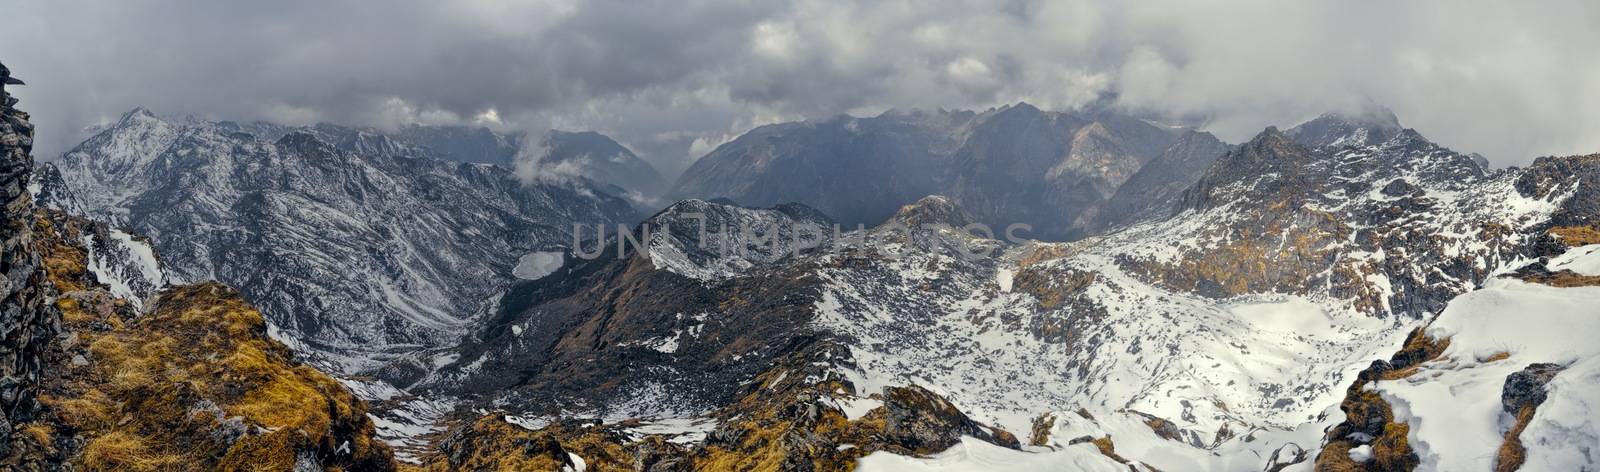 Mountains and clouds in Arunachal Pradesh, India by MichalKnitl